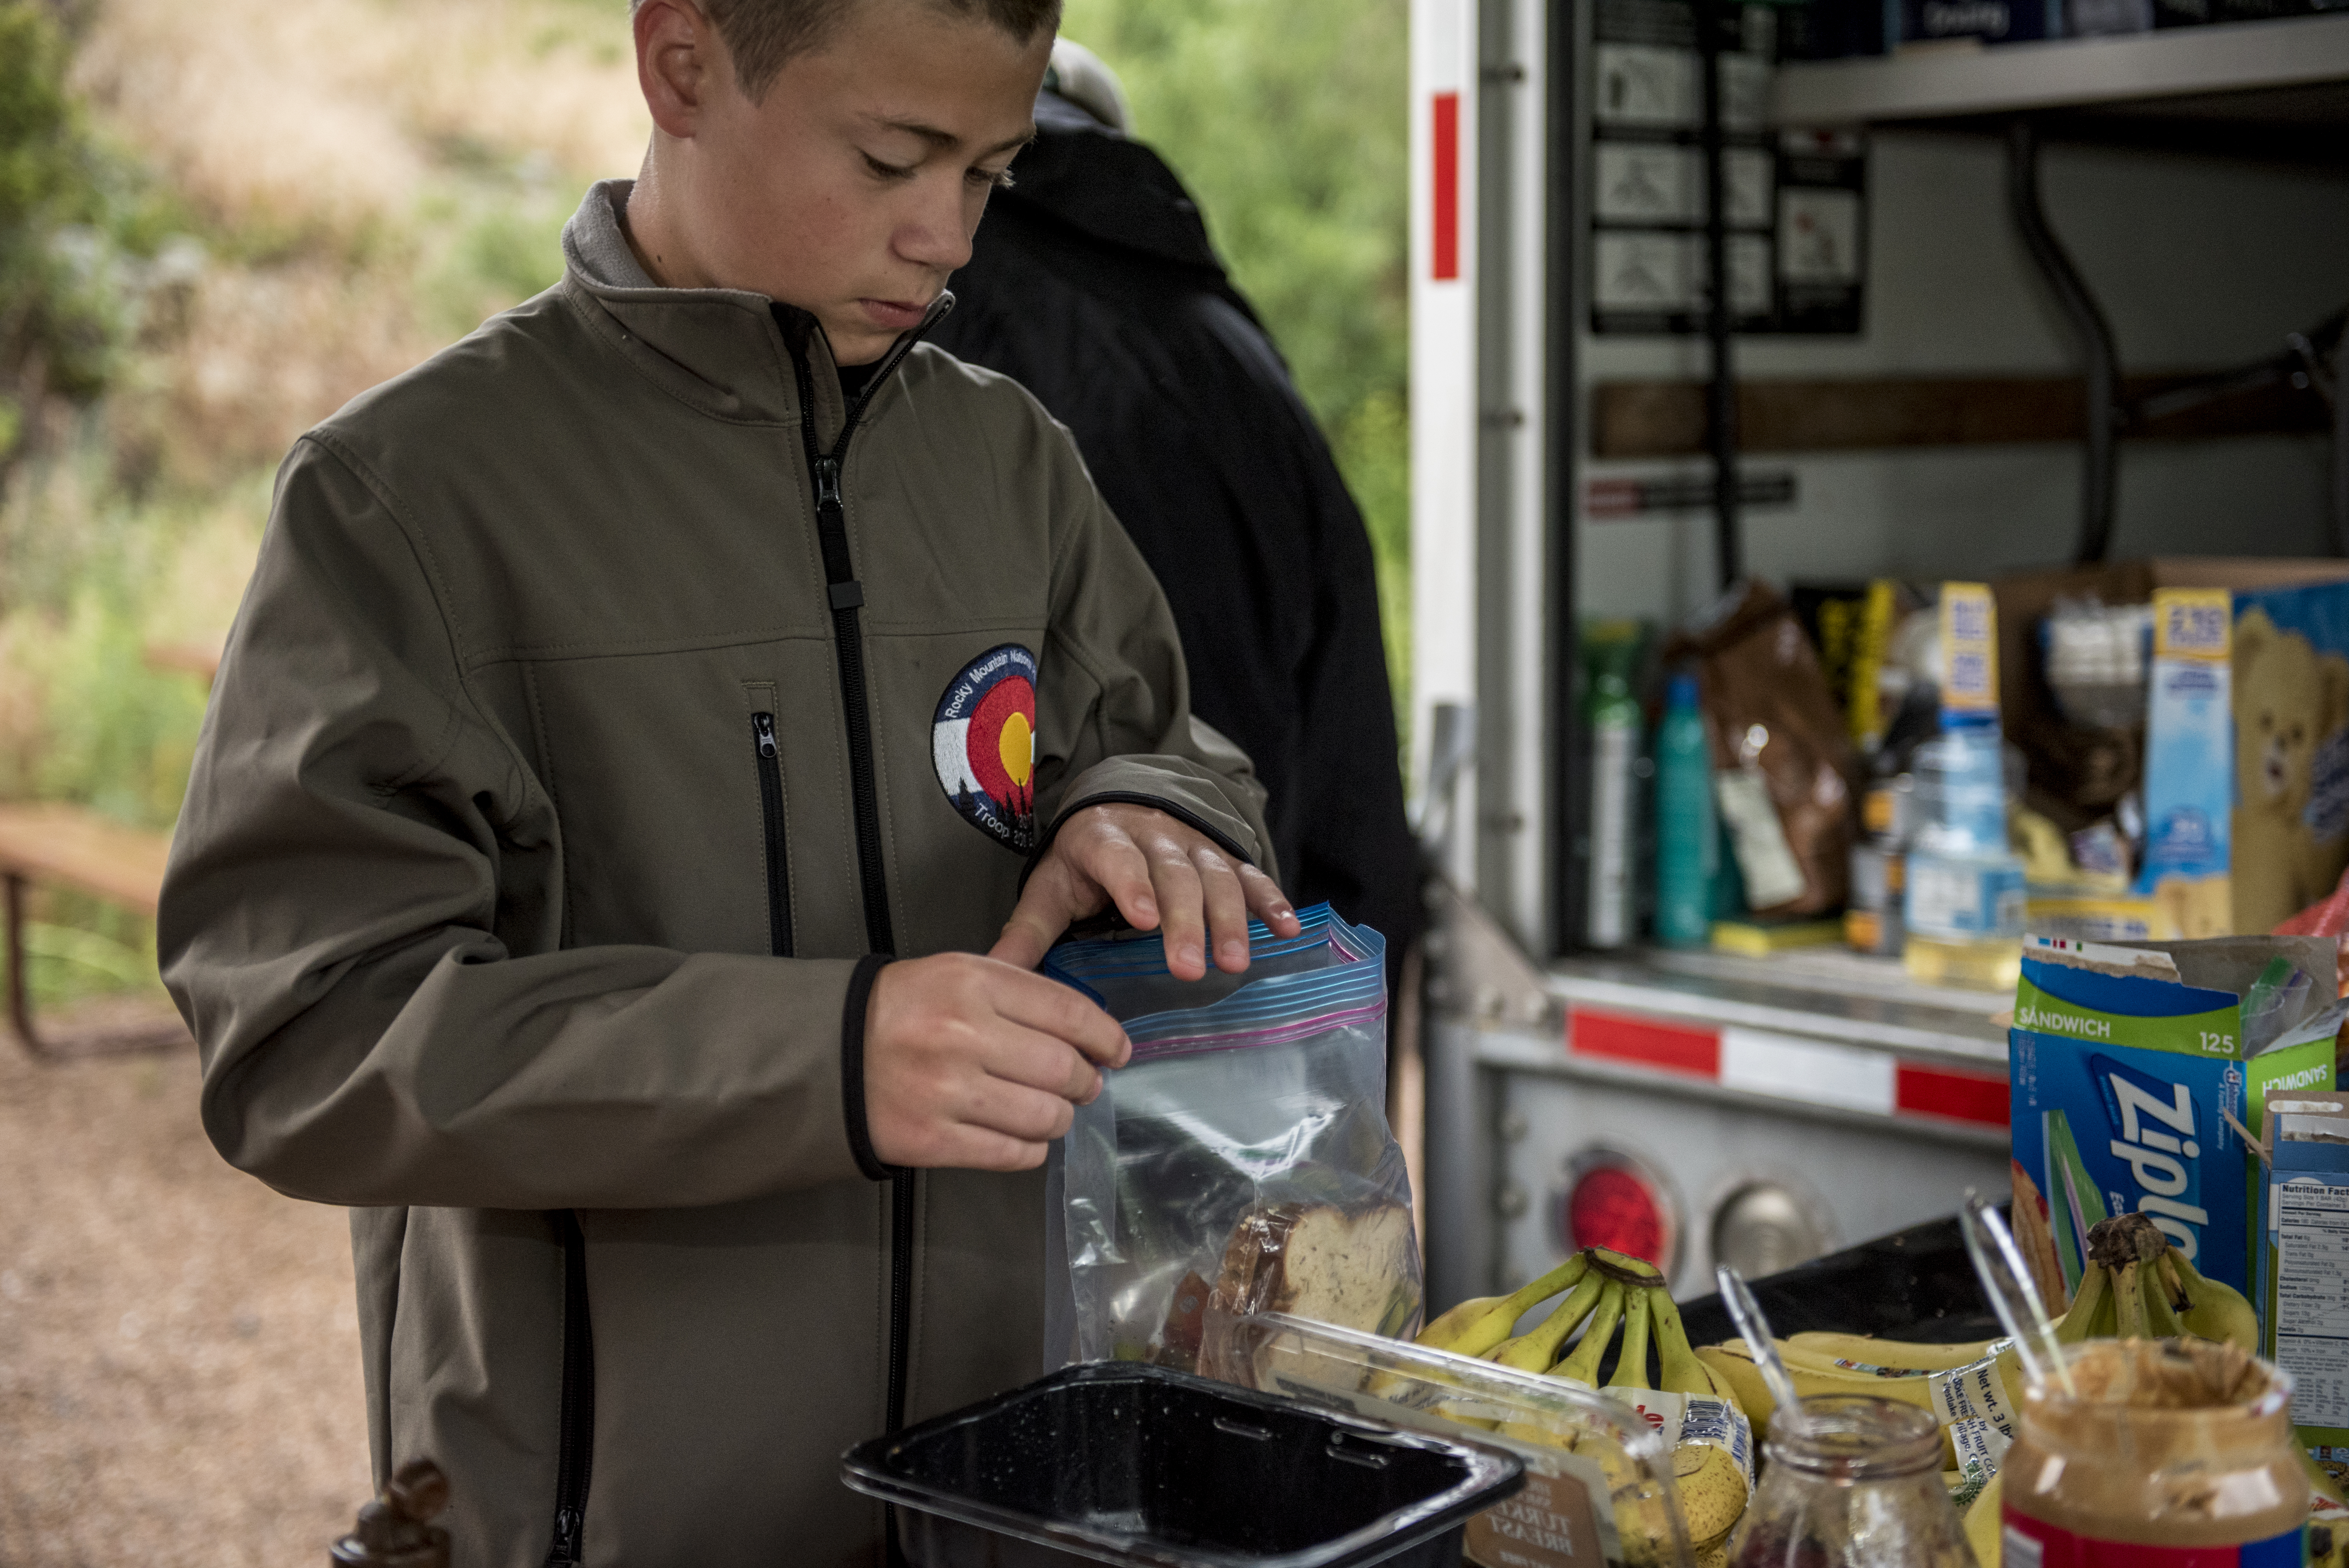 Scouts cook and eat  breakfast and get ready fot the days hike, in a campground in Estes Park during their adventure trip to Rocky Mountain National Park, Colorado